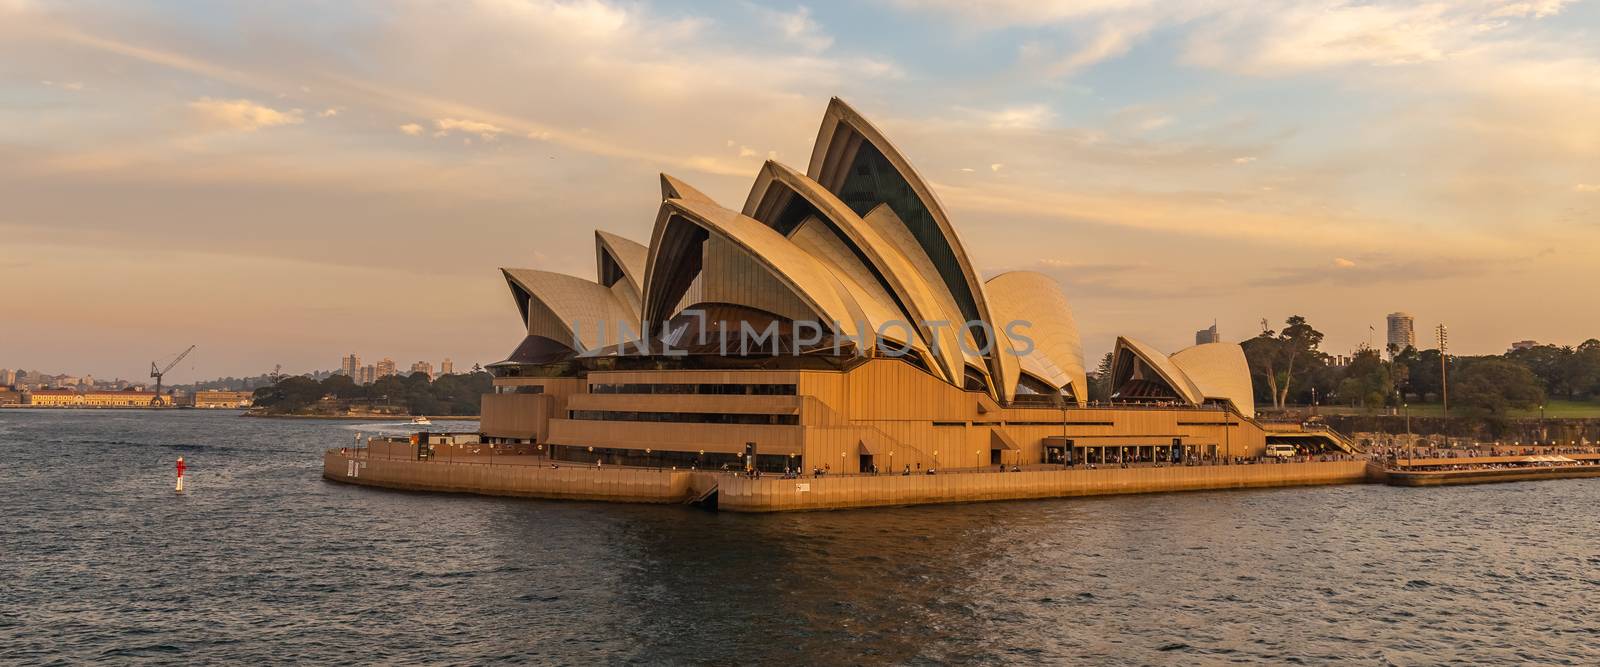 Close view of Sydney Opera House at sunset by DamantisZ